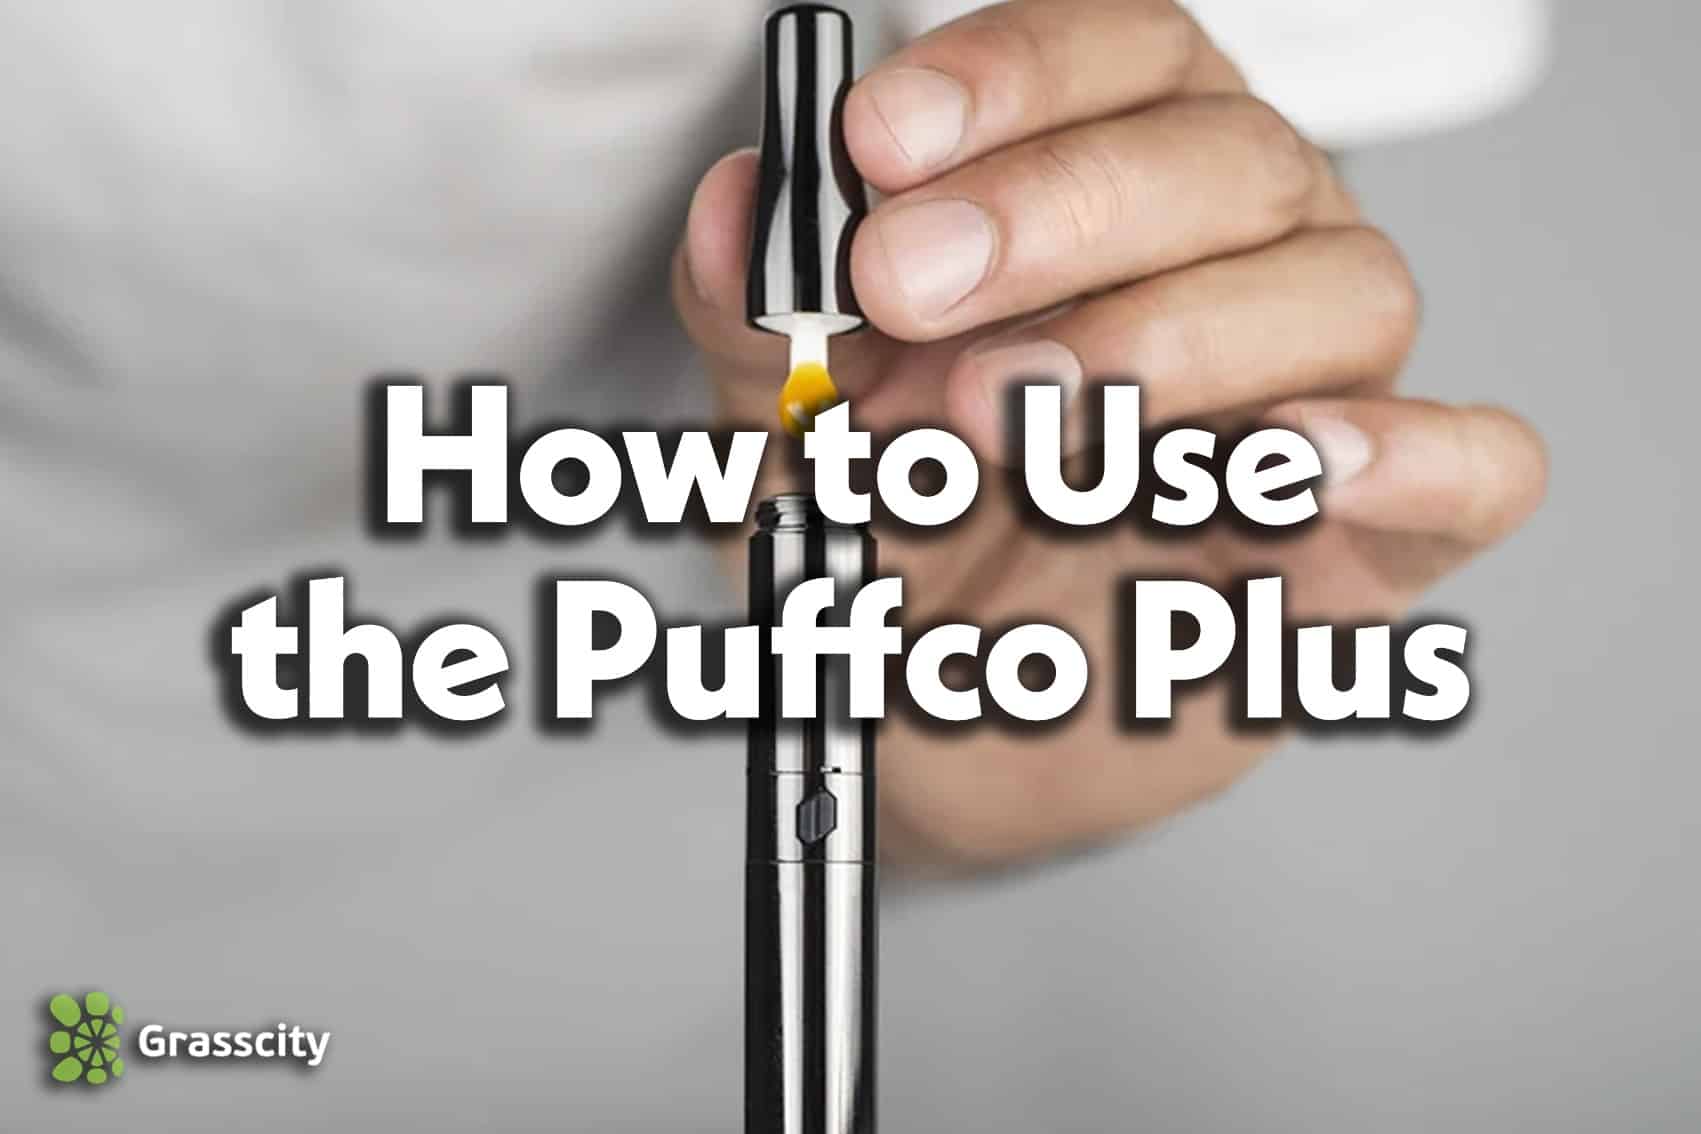 How to use the Puffco Plus?, Grasscity